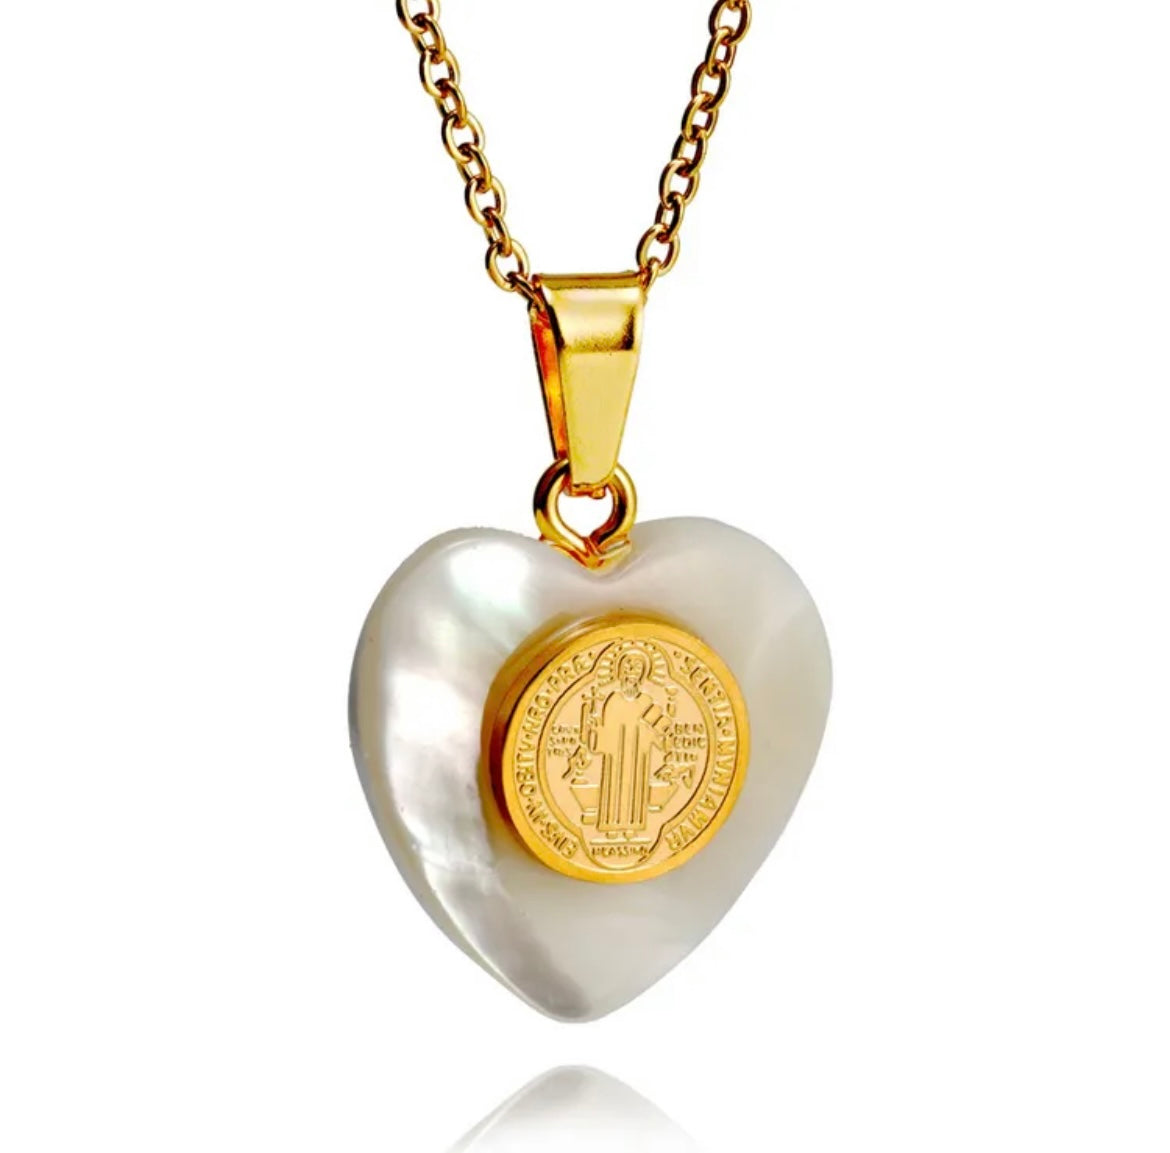 White shell heart shaped pendant necklace